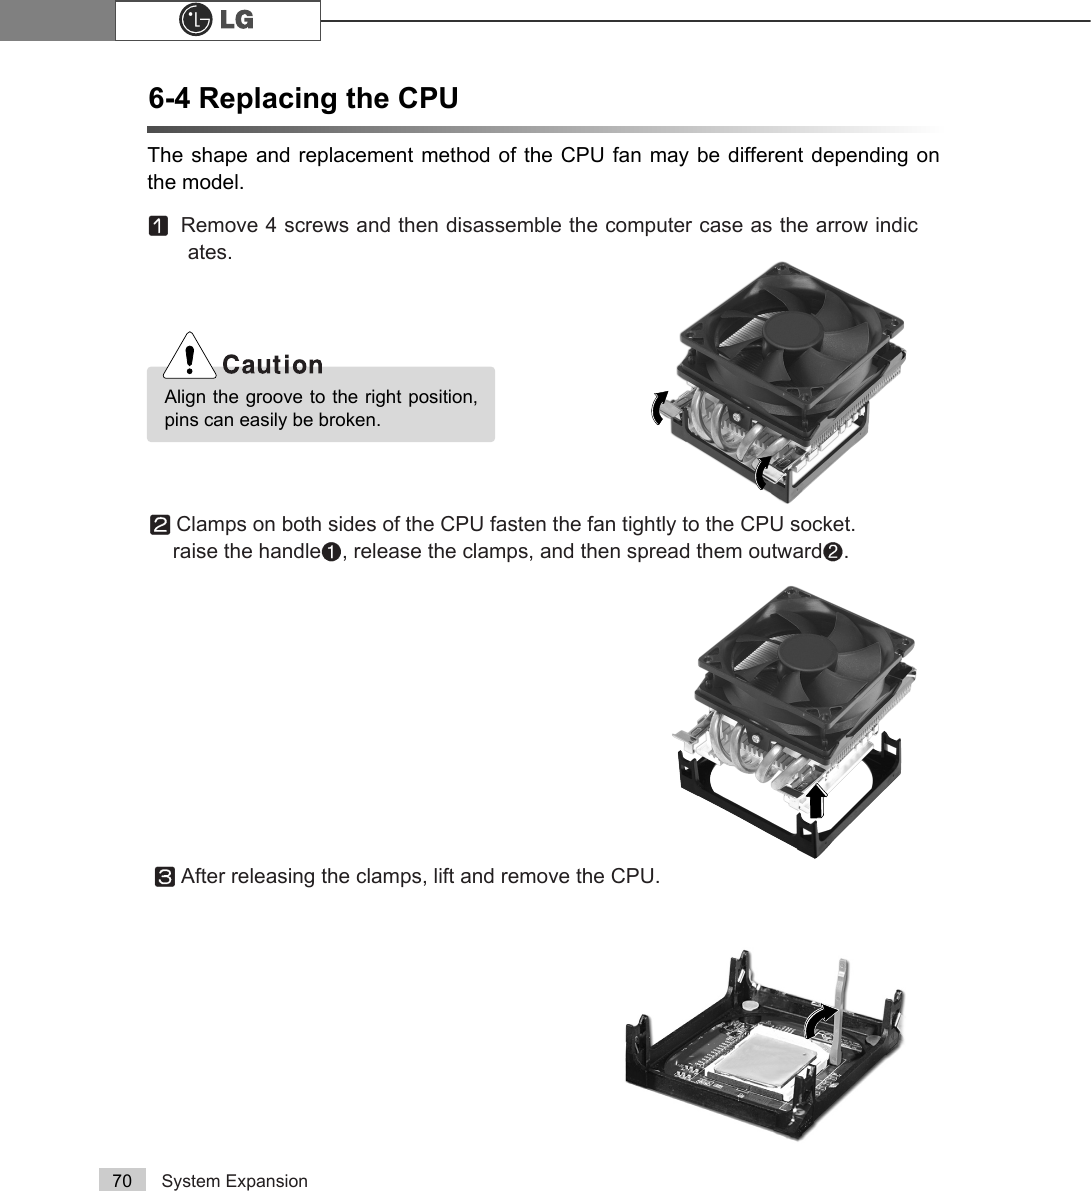 System Expansion706-4 Replacing the CPUThe shape and replacement method of the CPU fan may be different depending onthe model.ⓠAfter releasing the clamps, lift and remove the CPU.ⓞRemove 4 screws and then disassemble the computer case as the arrow indicates.Align the groove to the right position,pins can easily be broken.ⓟClamps on both sides of the CPU fasten the fan tightly to the CPU socket. raise the handle℘, release the clamps, and then spread them outwardℙ.